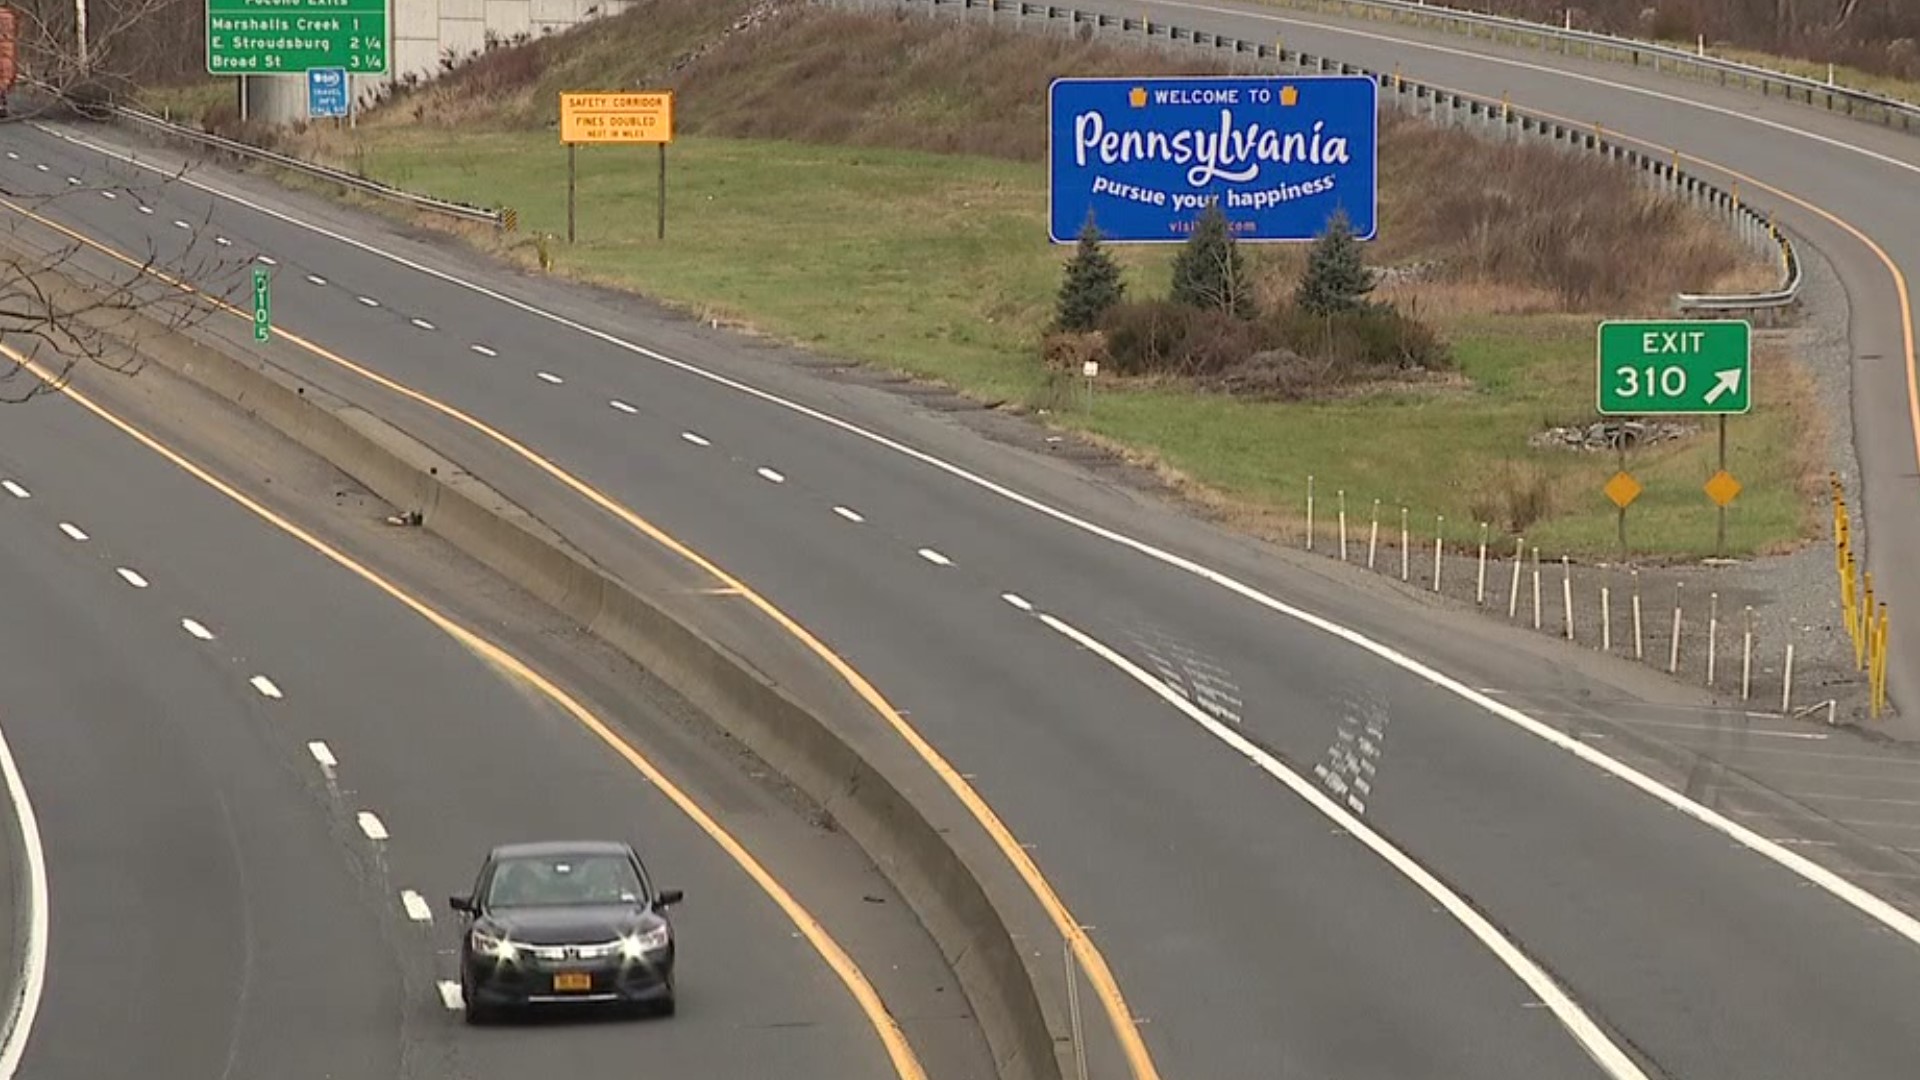 A new AAA survey shows many people from Pennsylvania and surrounding states will not be traveling for Thanksgiving.